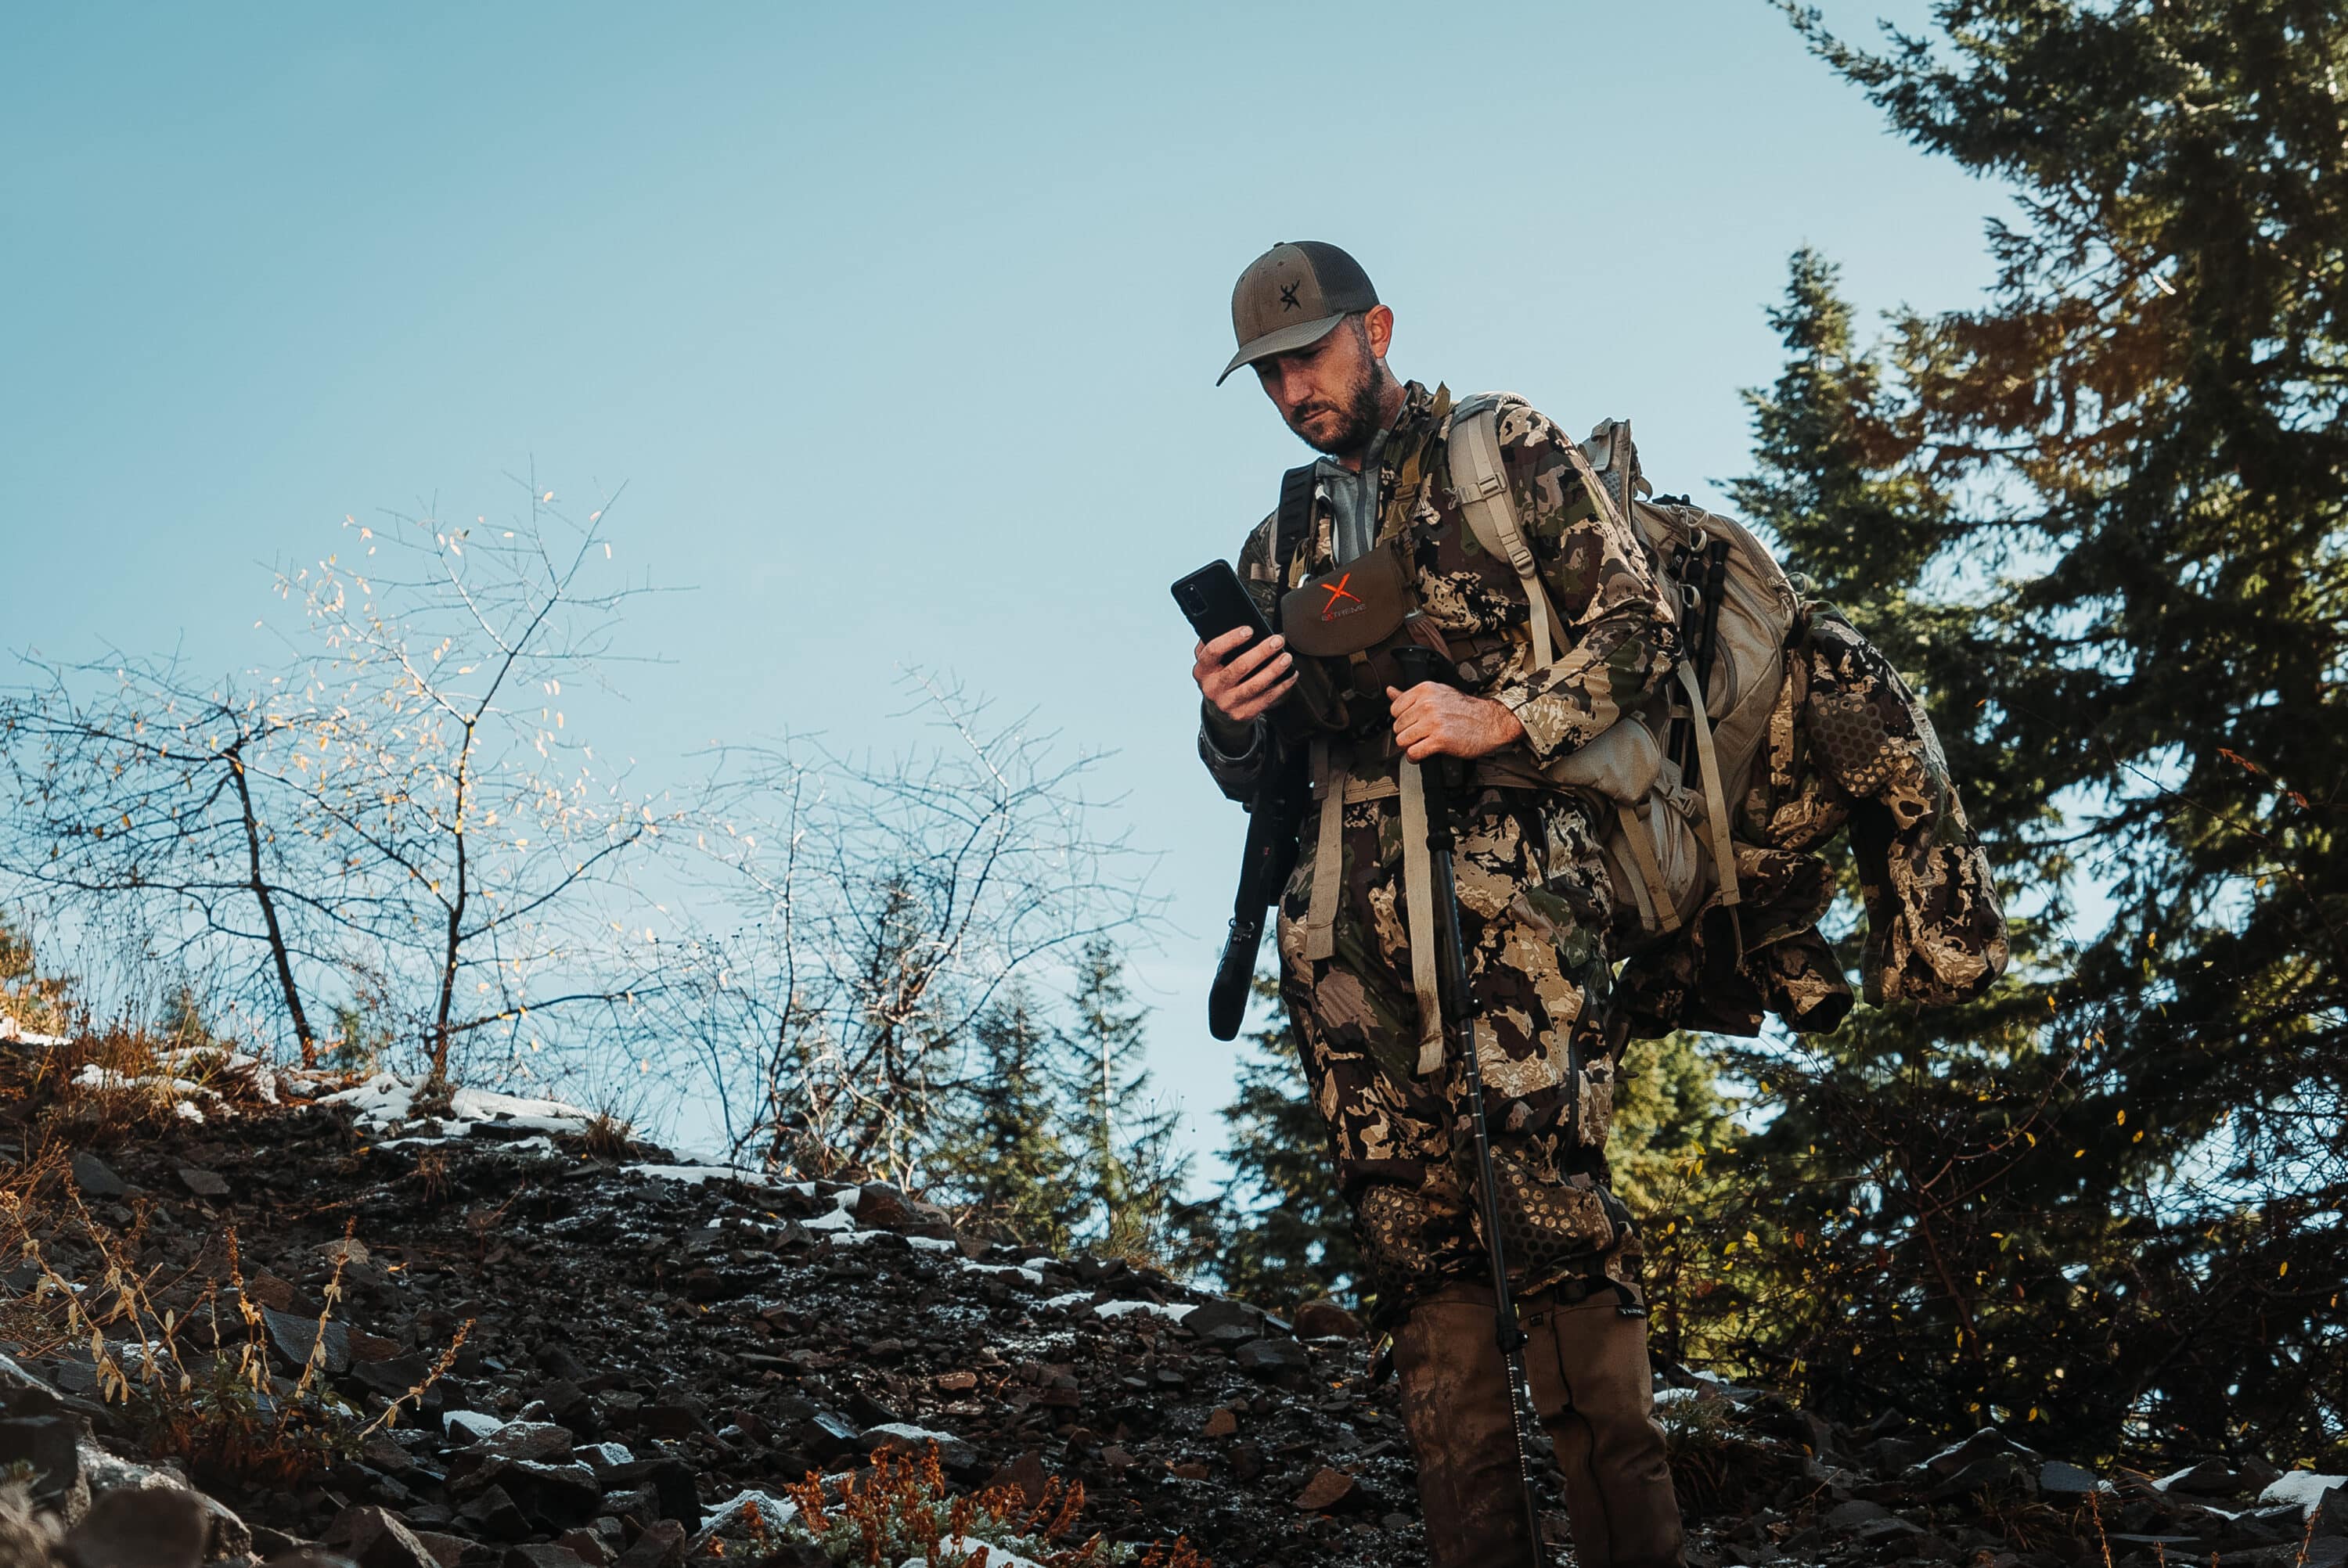 Use available tools, such as HuntStand, to navigate the hunt.